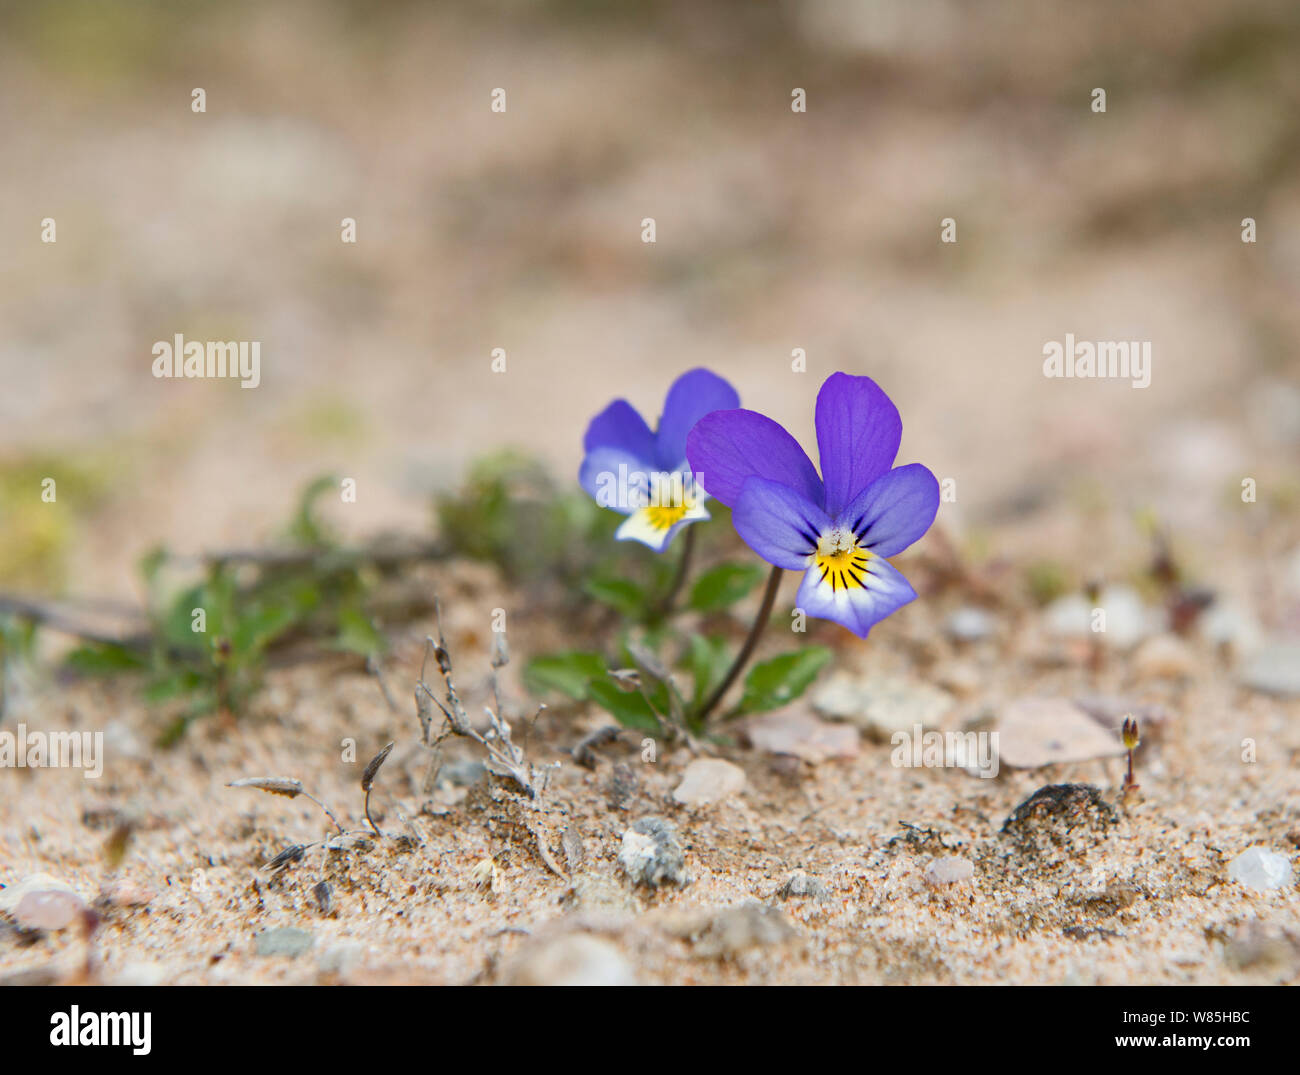 Wild pansy (Viola tricolor) growing in sand dune, Sands of Forvie National Nature Reserve, Aberdeenshire, Scotland, June. Stock Photo